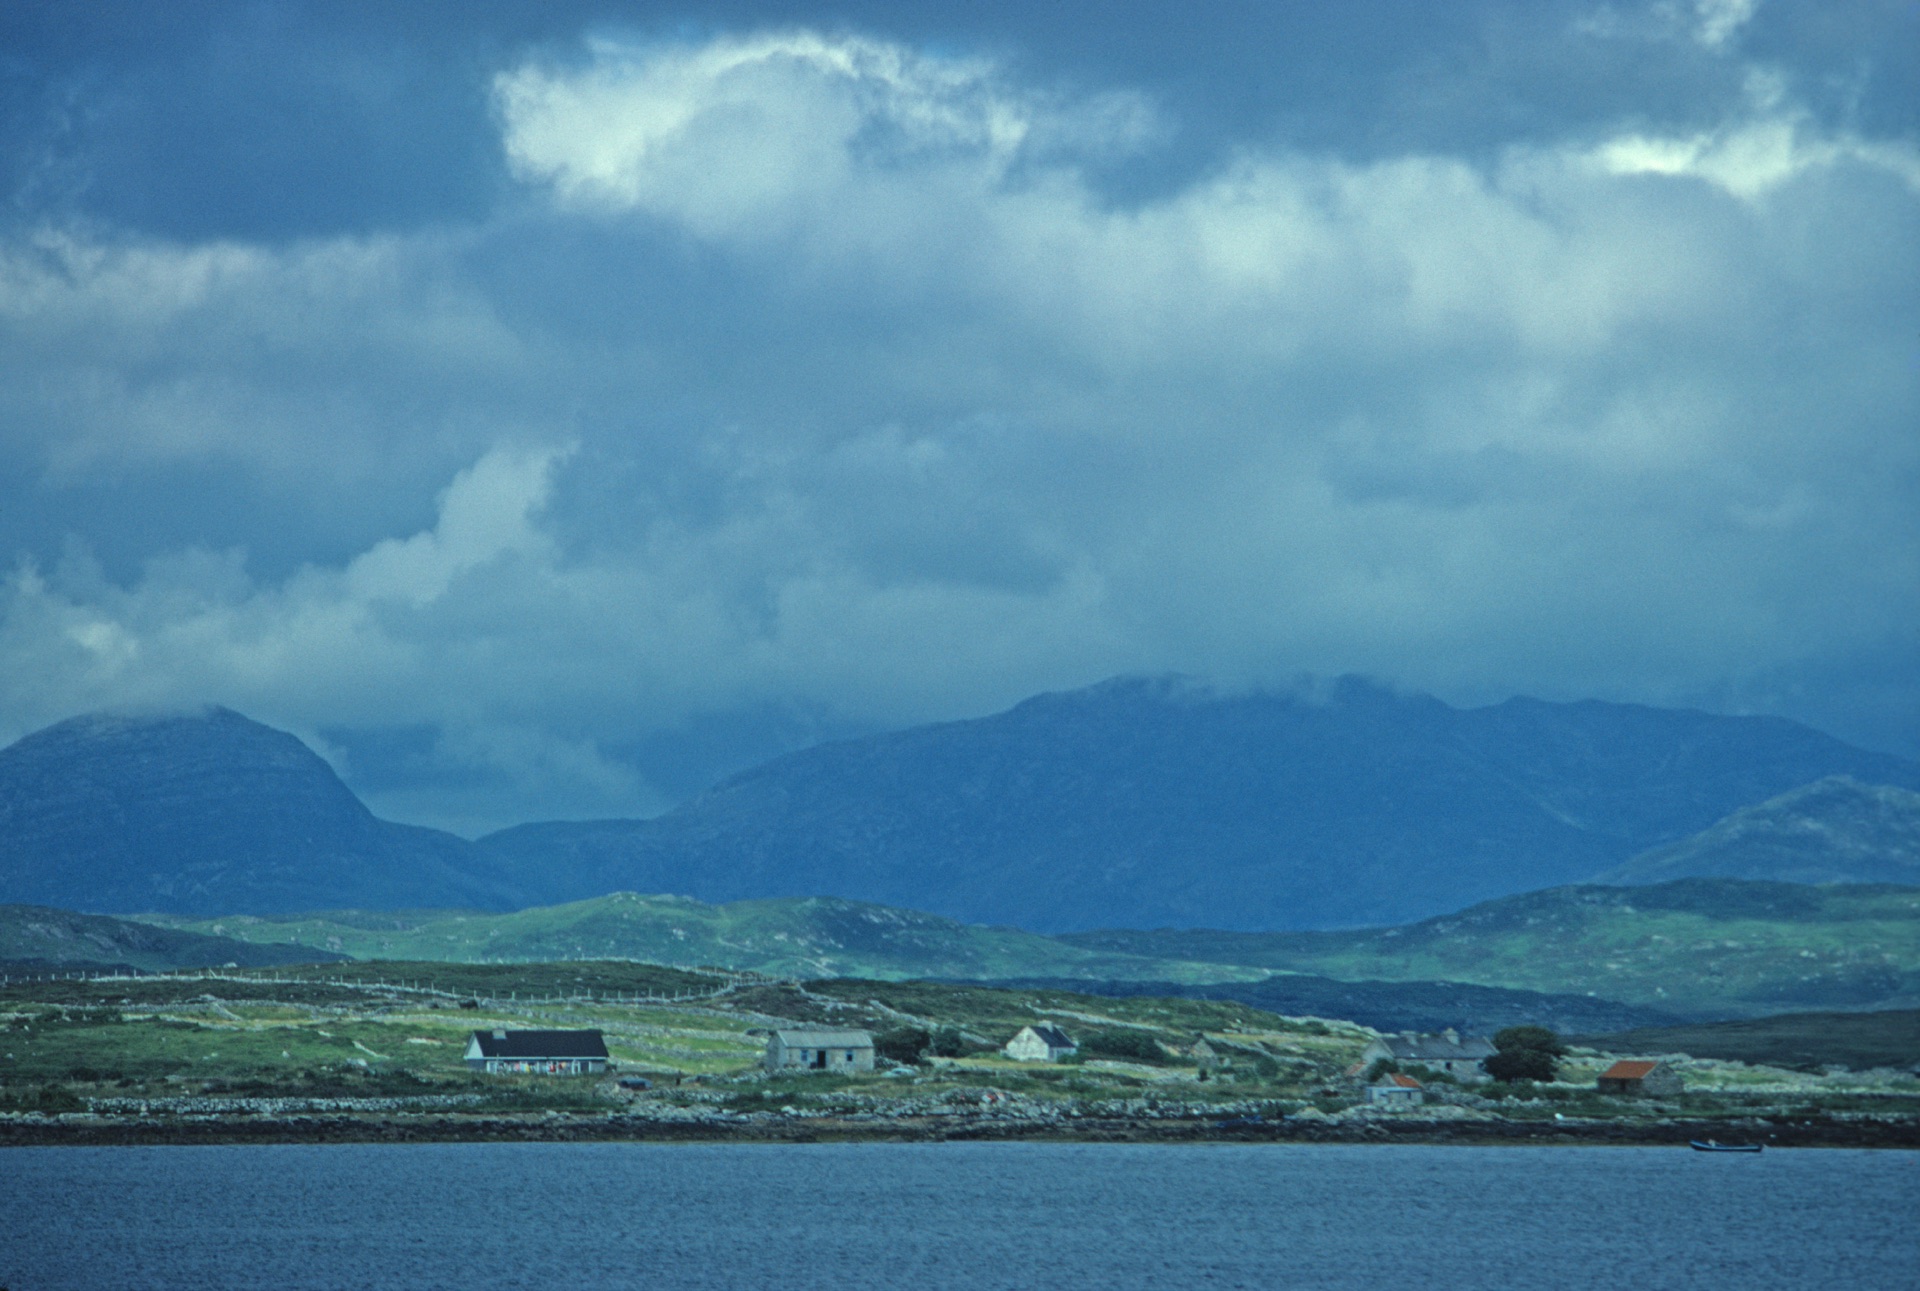 Landscape from Across Roundston Harbor, Co.Galway